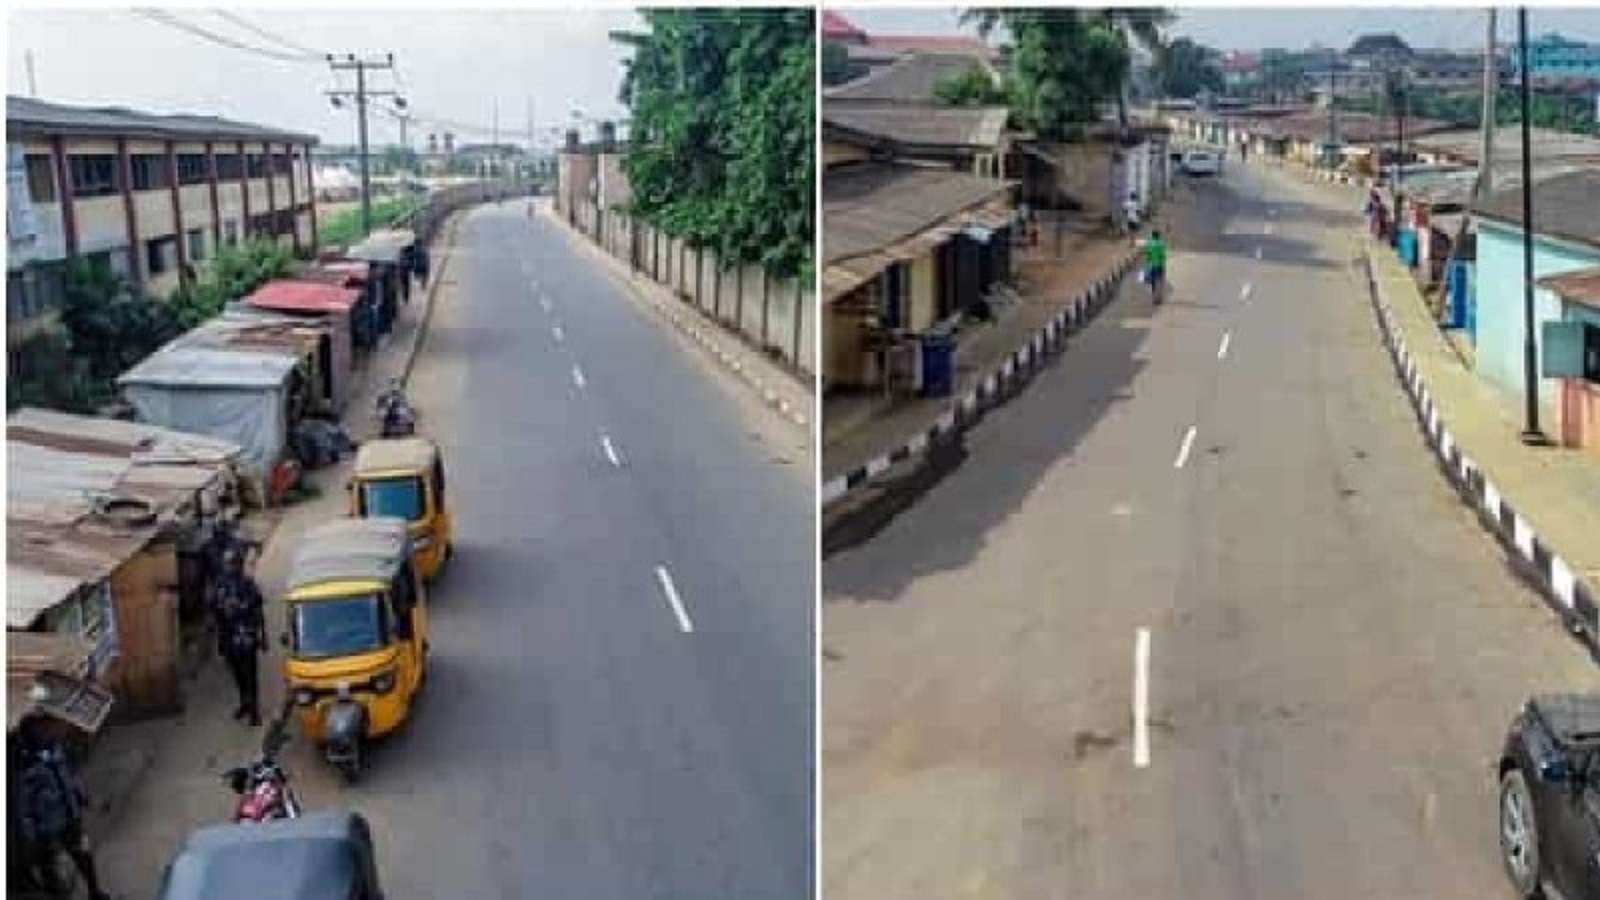 Panic in Lagos as armed robbers attack residents